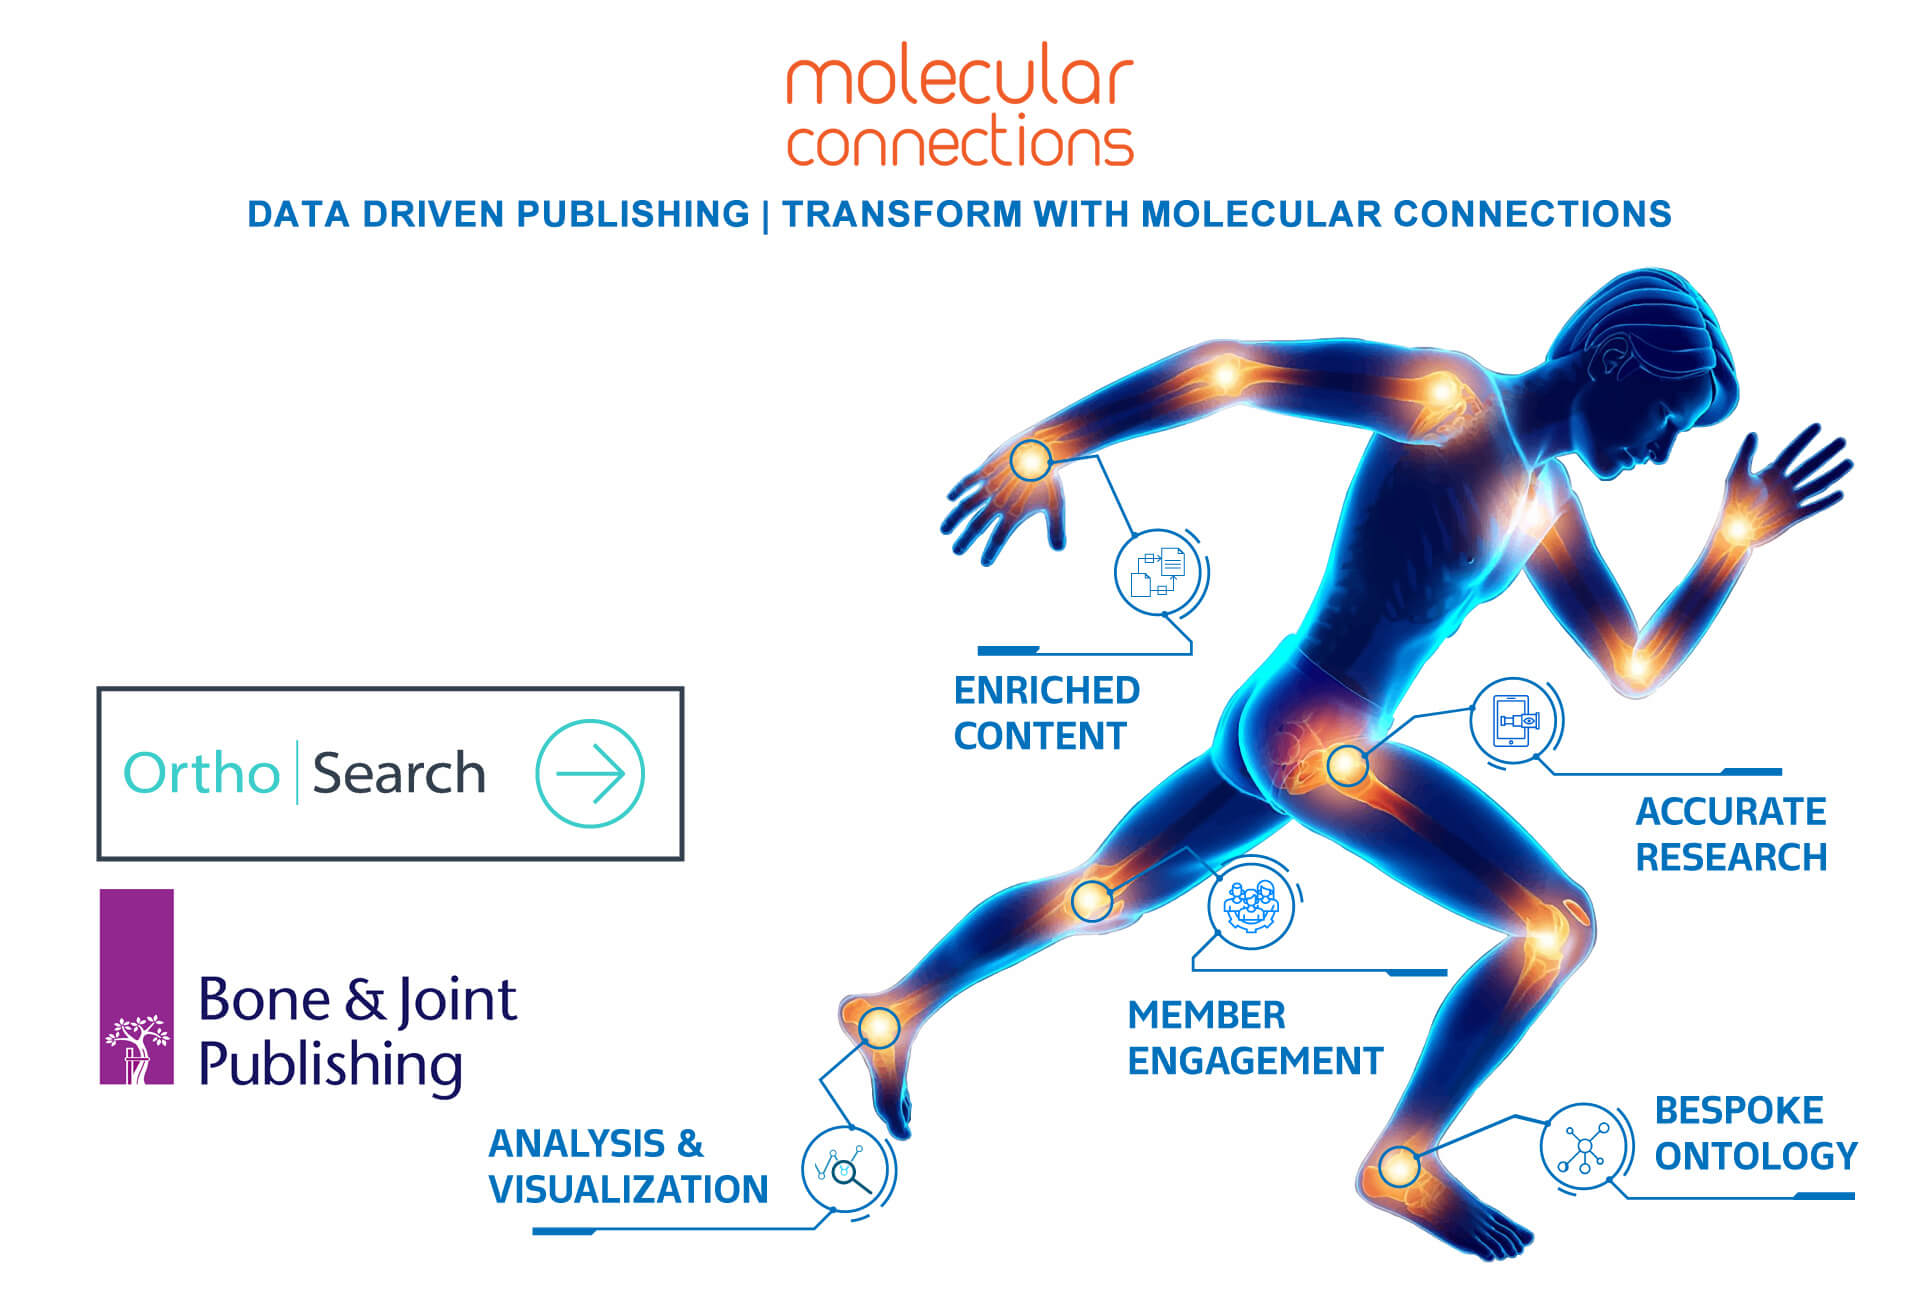 Data Driven Publishing| Transform with Molecular Connections